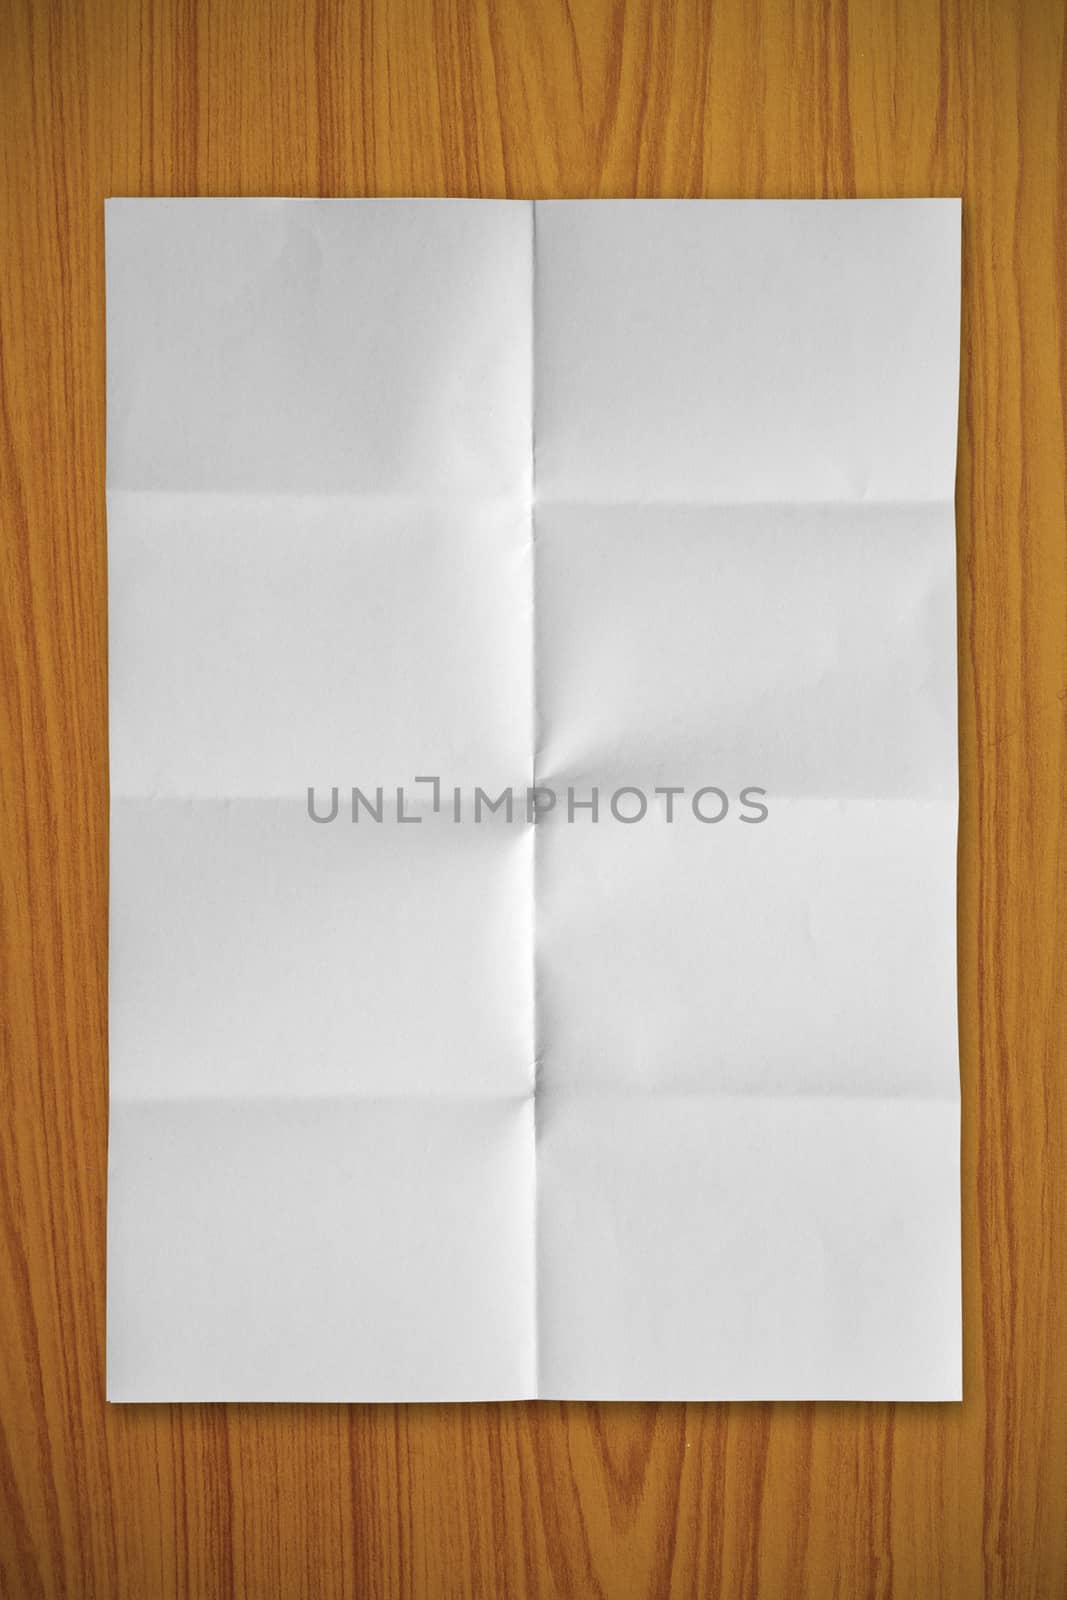 Blank white paper on a wooden background